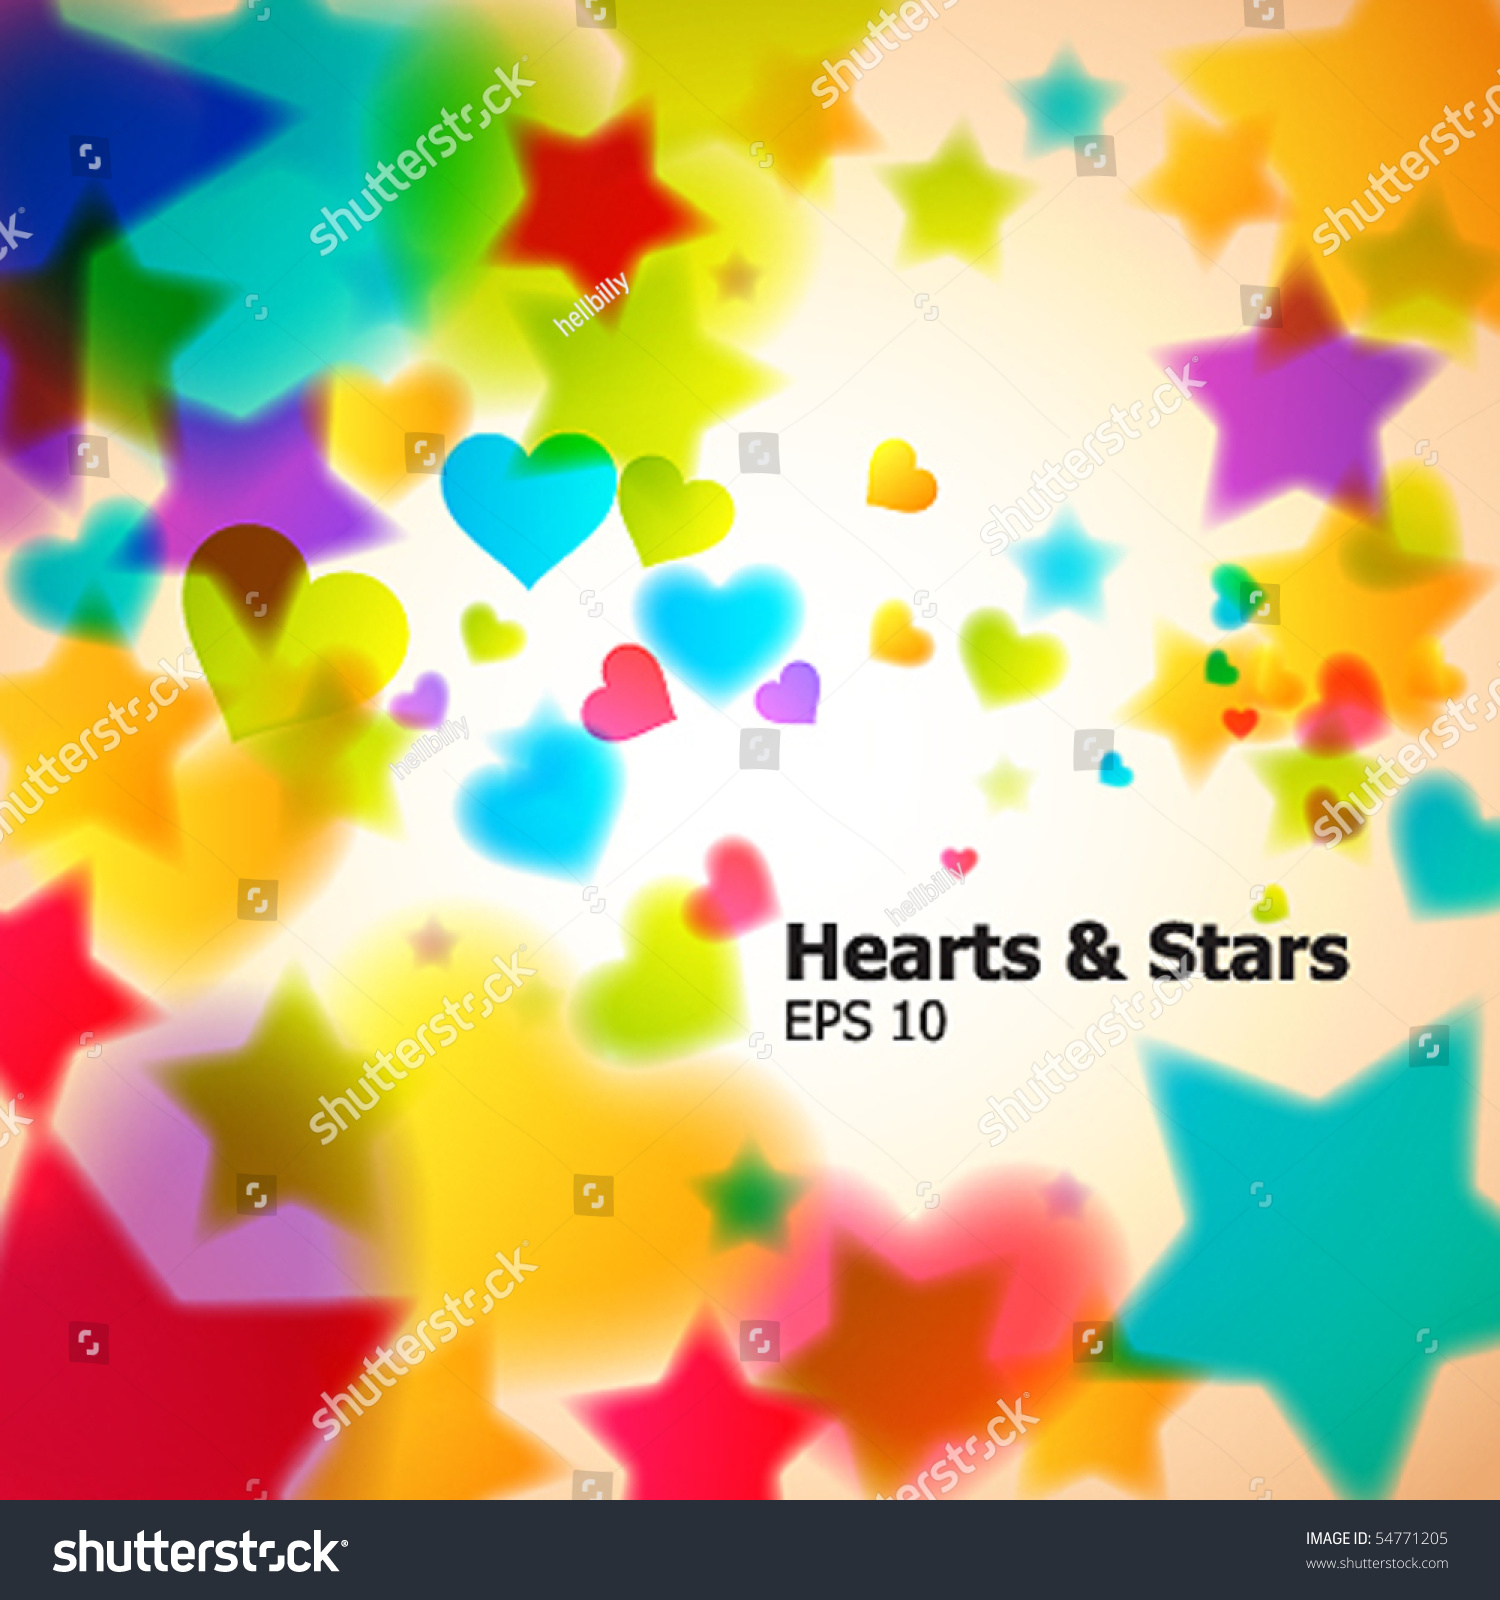 Abstract Vector Background. Eps 10. - 54771205 : Shutterstock